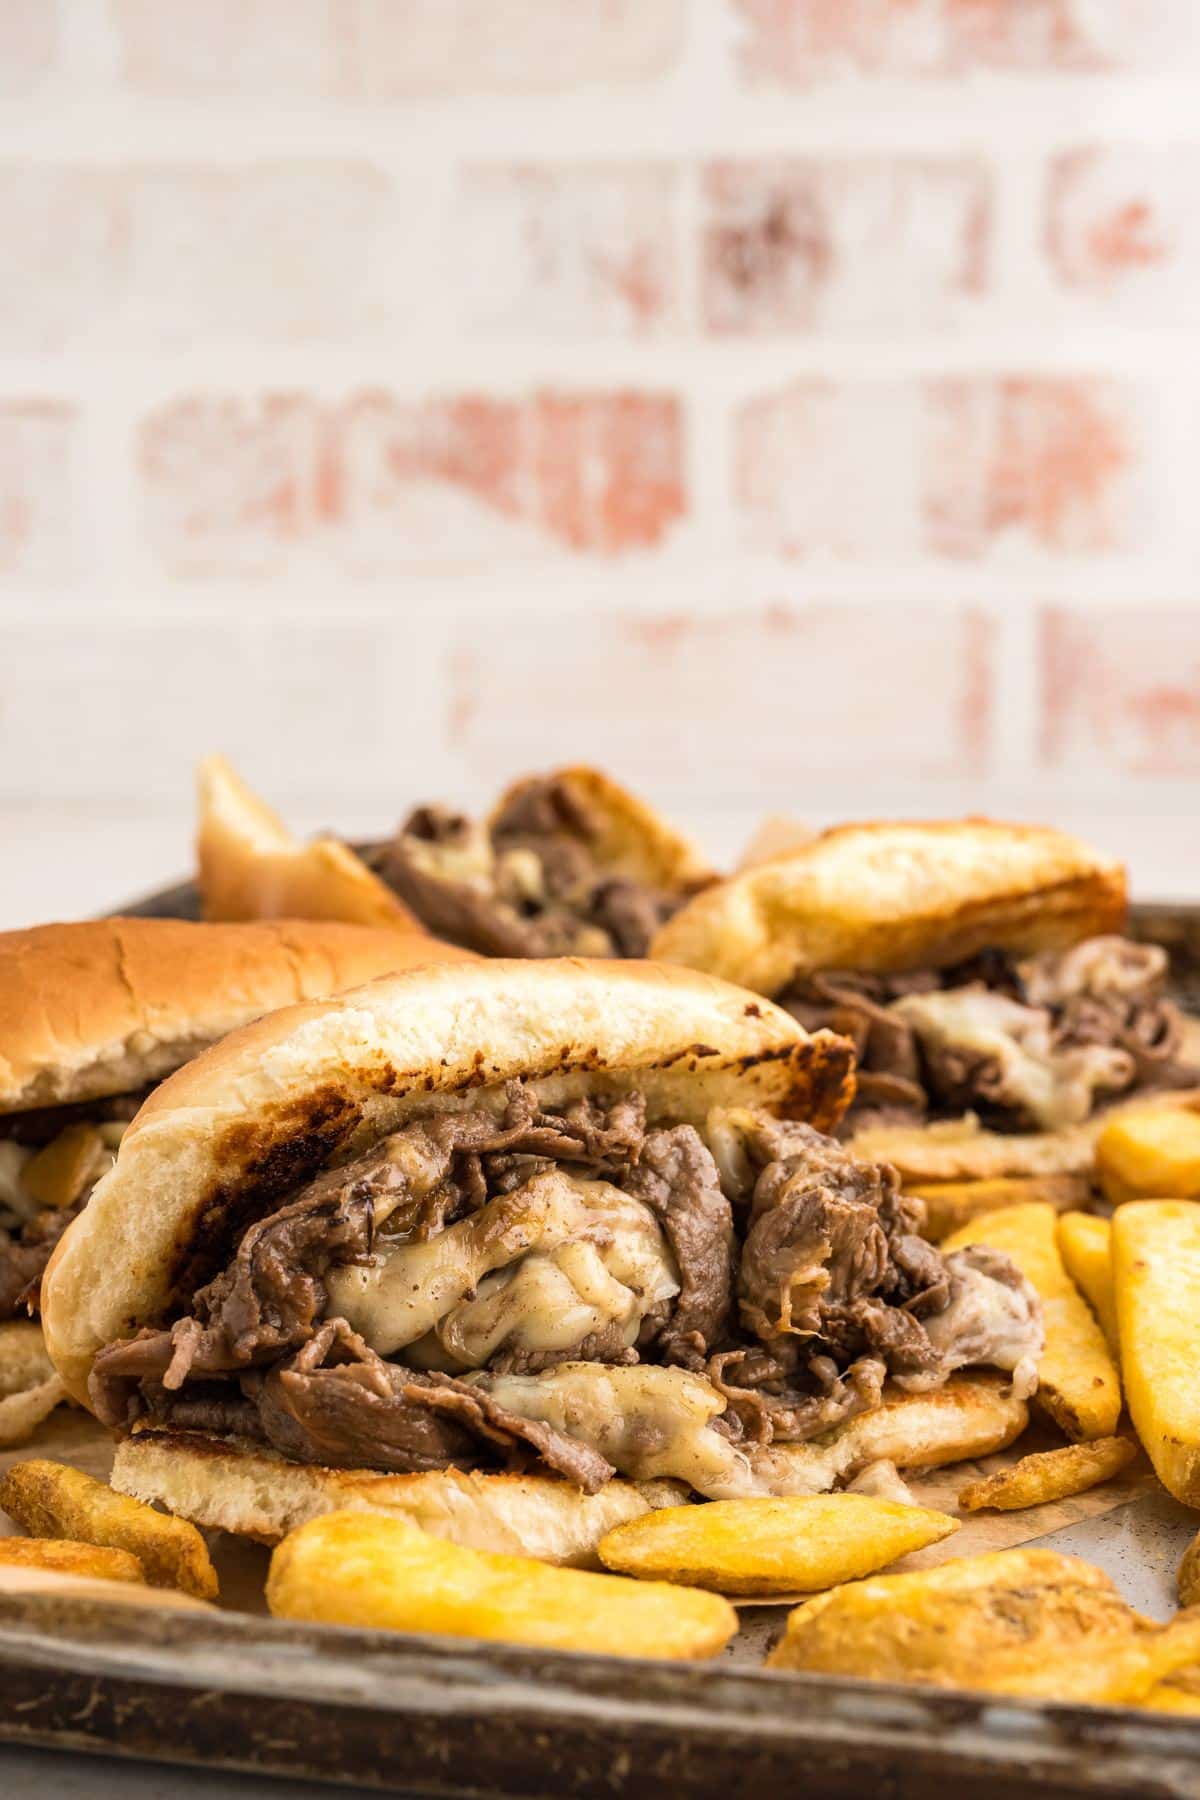 Shaved steak sandwiches on plates with french fries.